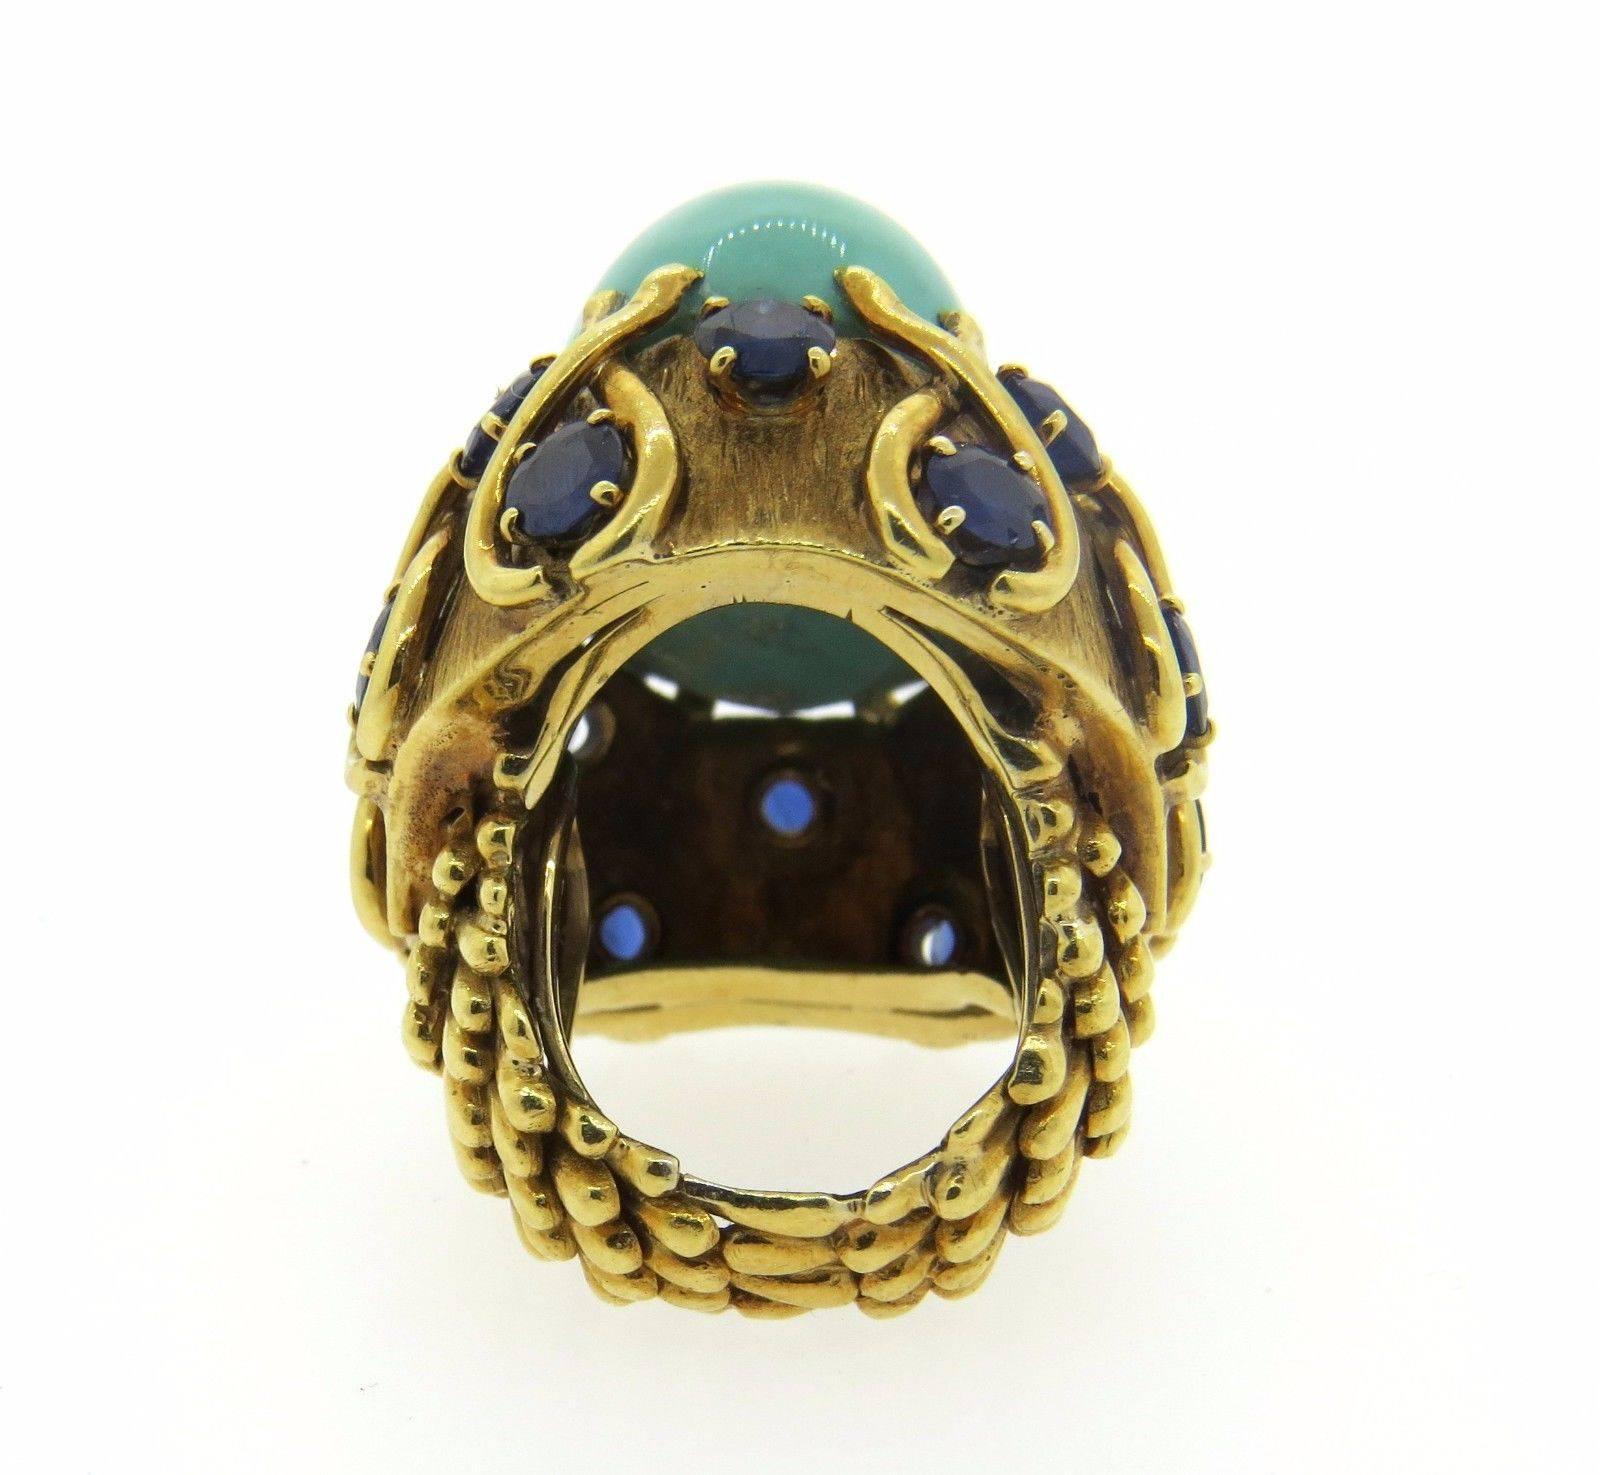 An 18k yellow gold ring set with a turquoise (26mm x 15mm x 12mm) and approximately 5.20ctw in blue sapphires.  Crafted by David Webb, the ring is a size 5, ring top measures 34mm x 27mm. Sits approx. 22mm from finger.  The weight of the piece is